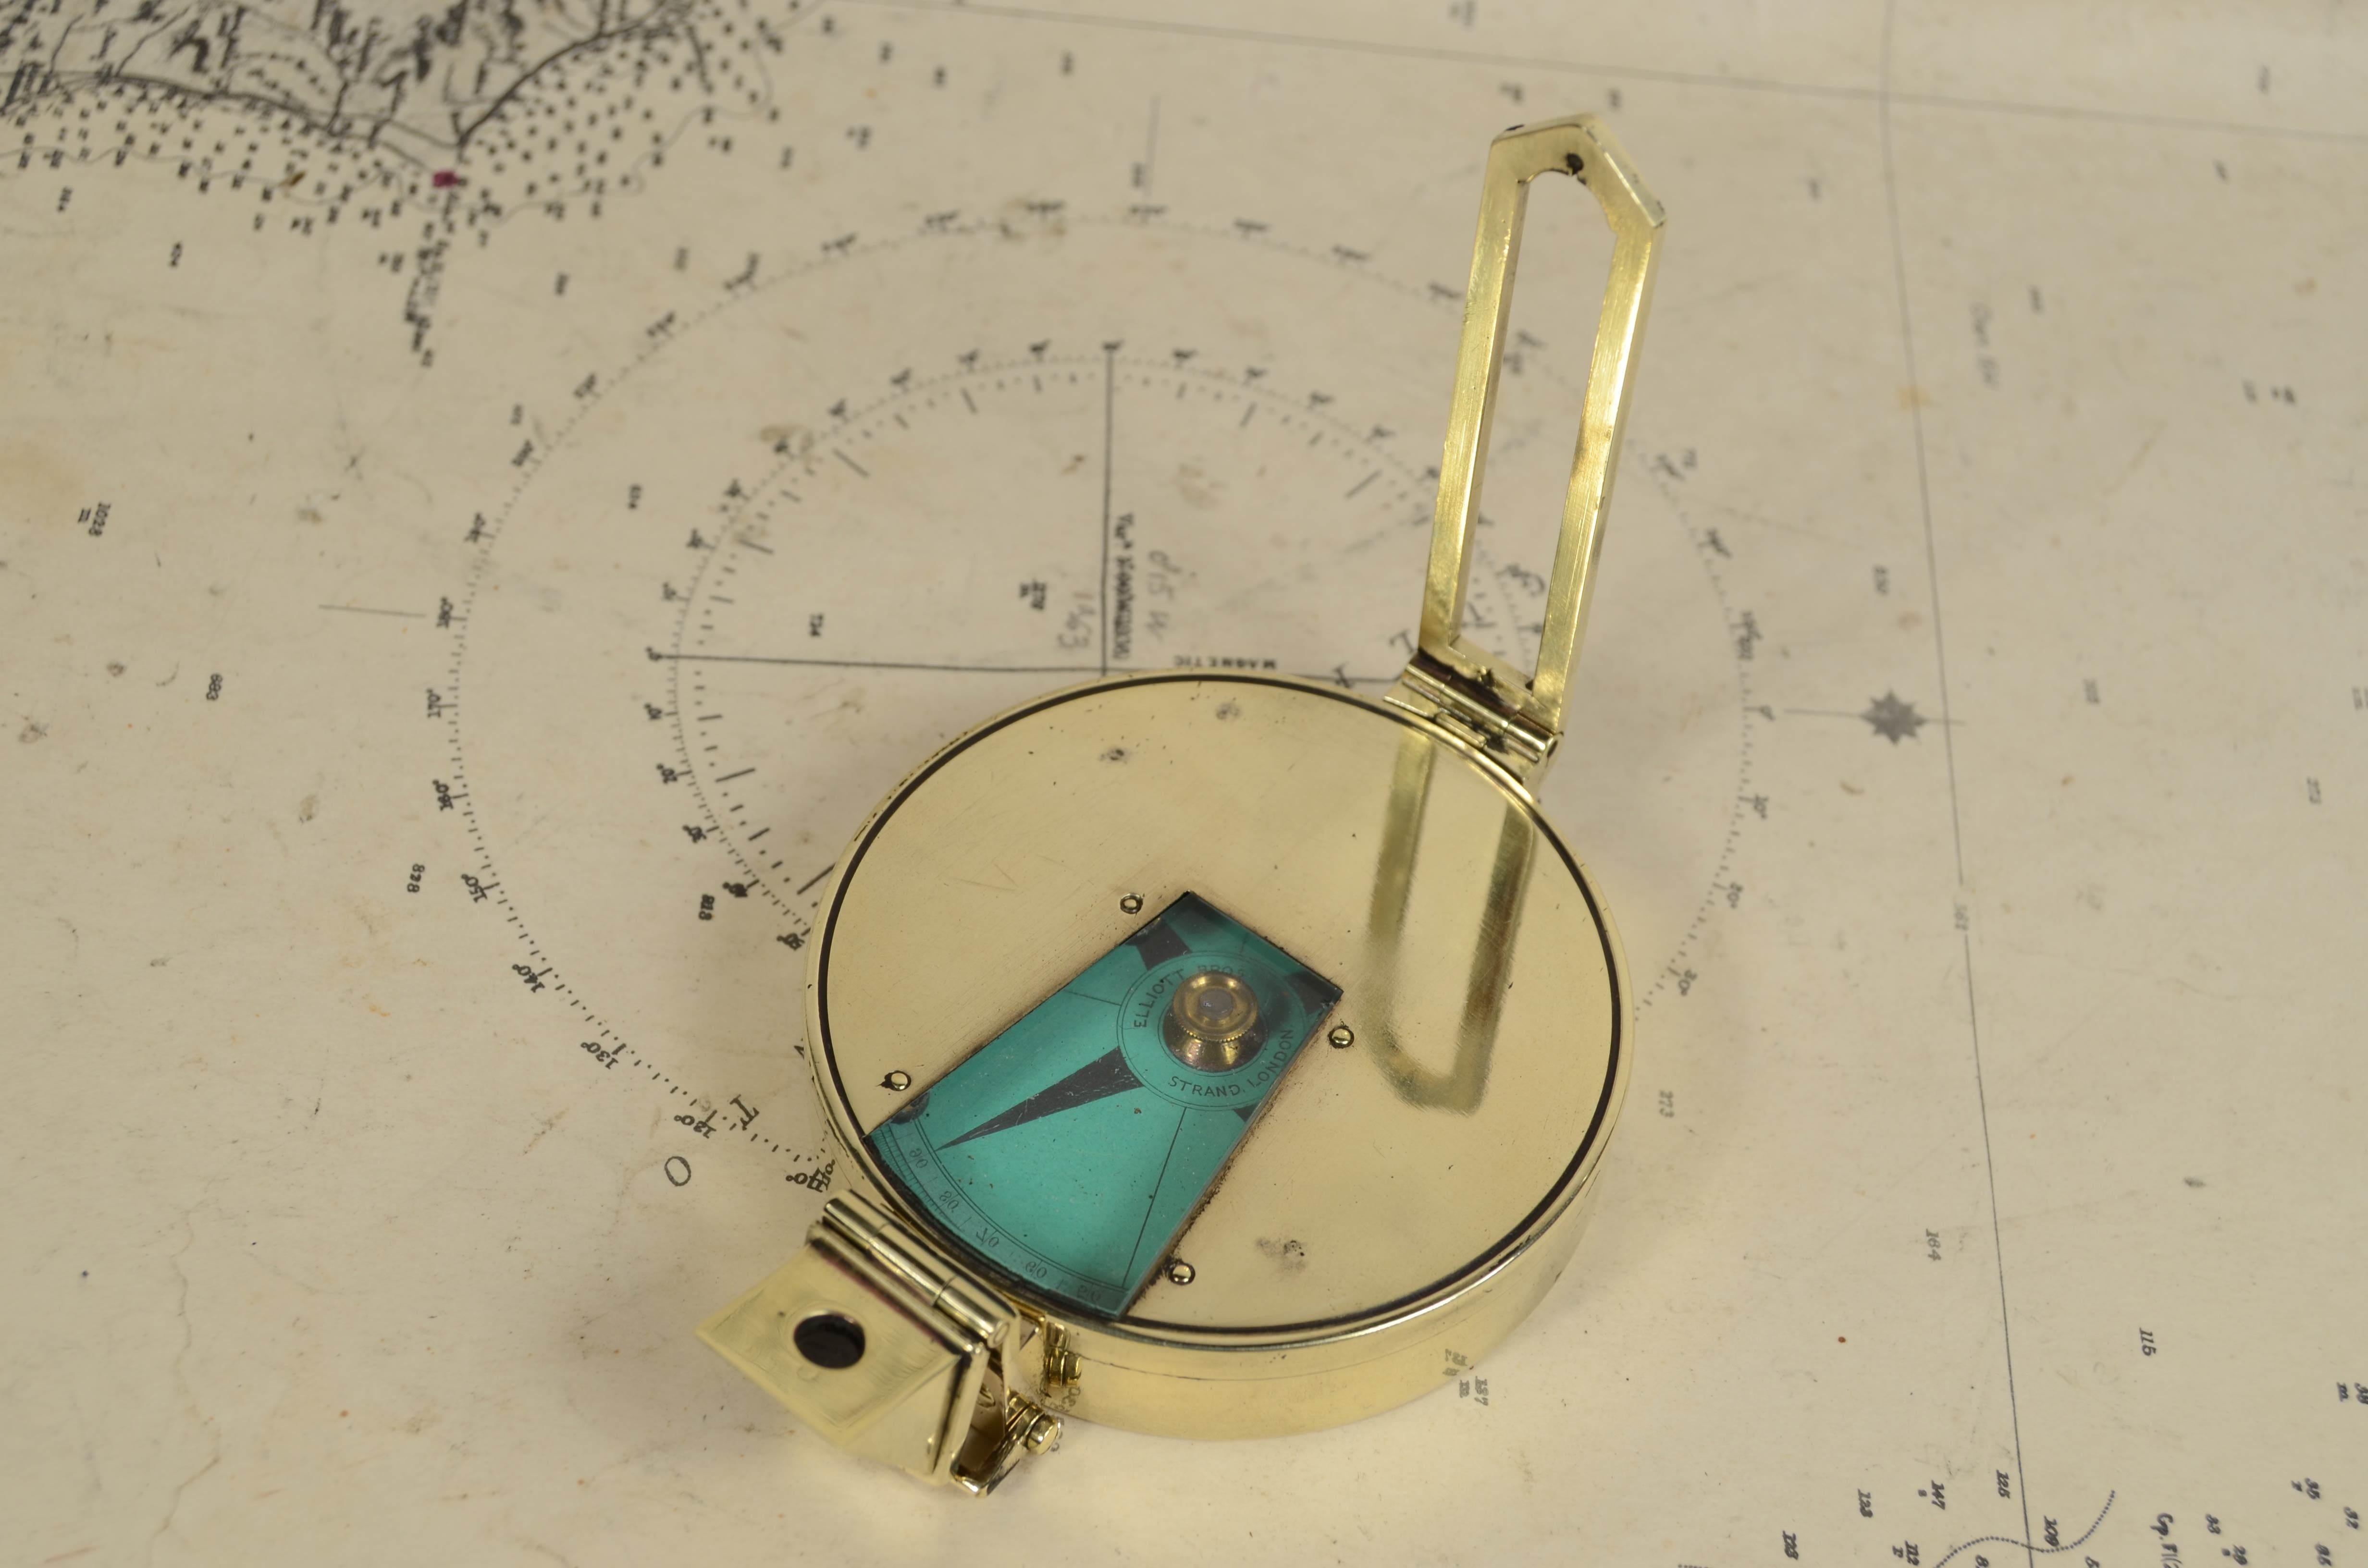 Rare magnetic nautical surveying compass, brass, late 19th century signed Elliott Bros London complete with leather case. This is a small compass, 7 cm diameter, typically used in recreational sailing, thus on boats less prone to magnetic deviation.